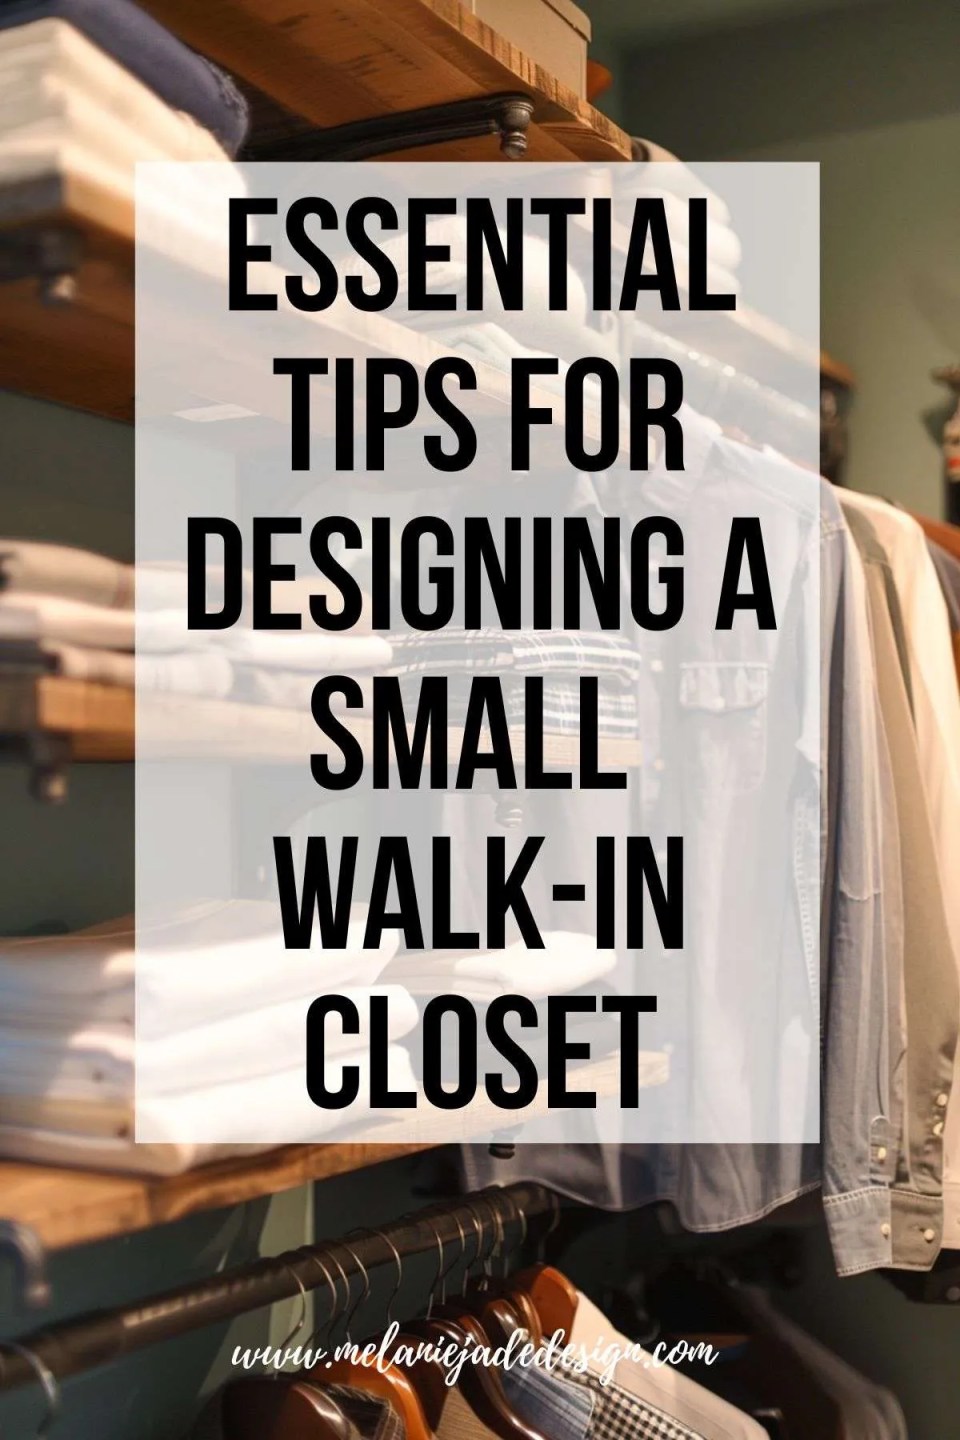 Essential Tips for Designing a Small Walk-In Closet: Do's and Don'ts Pinterest pin